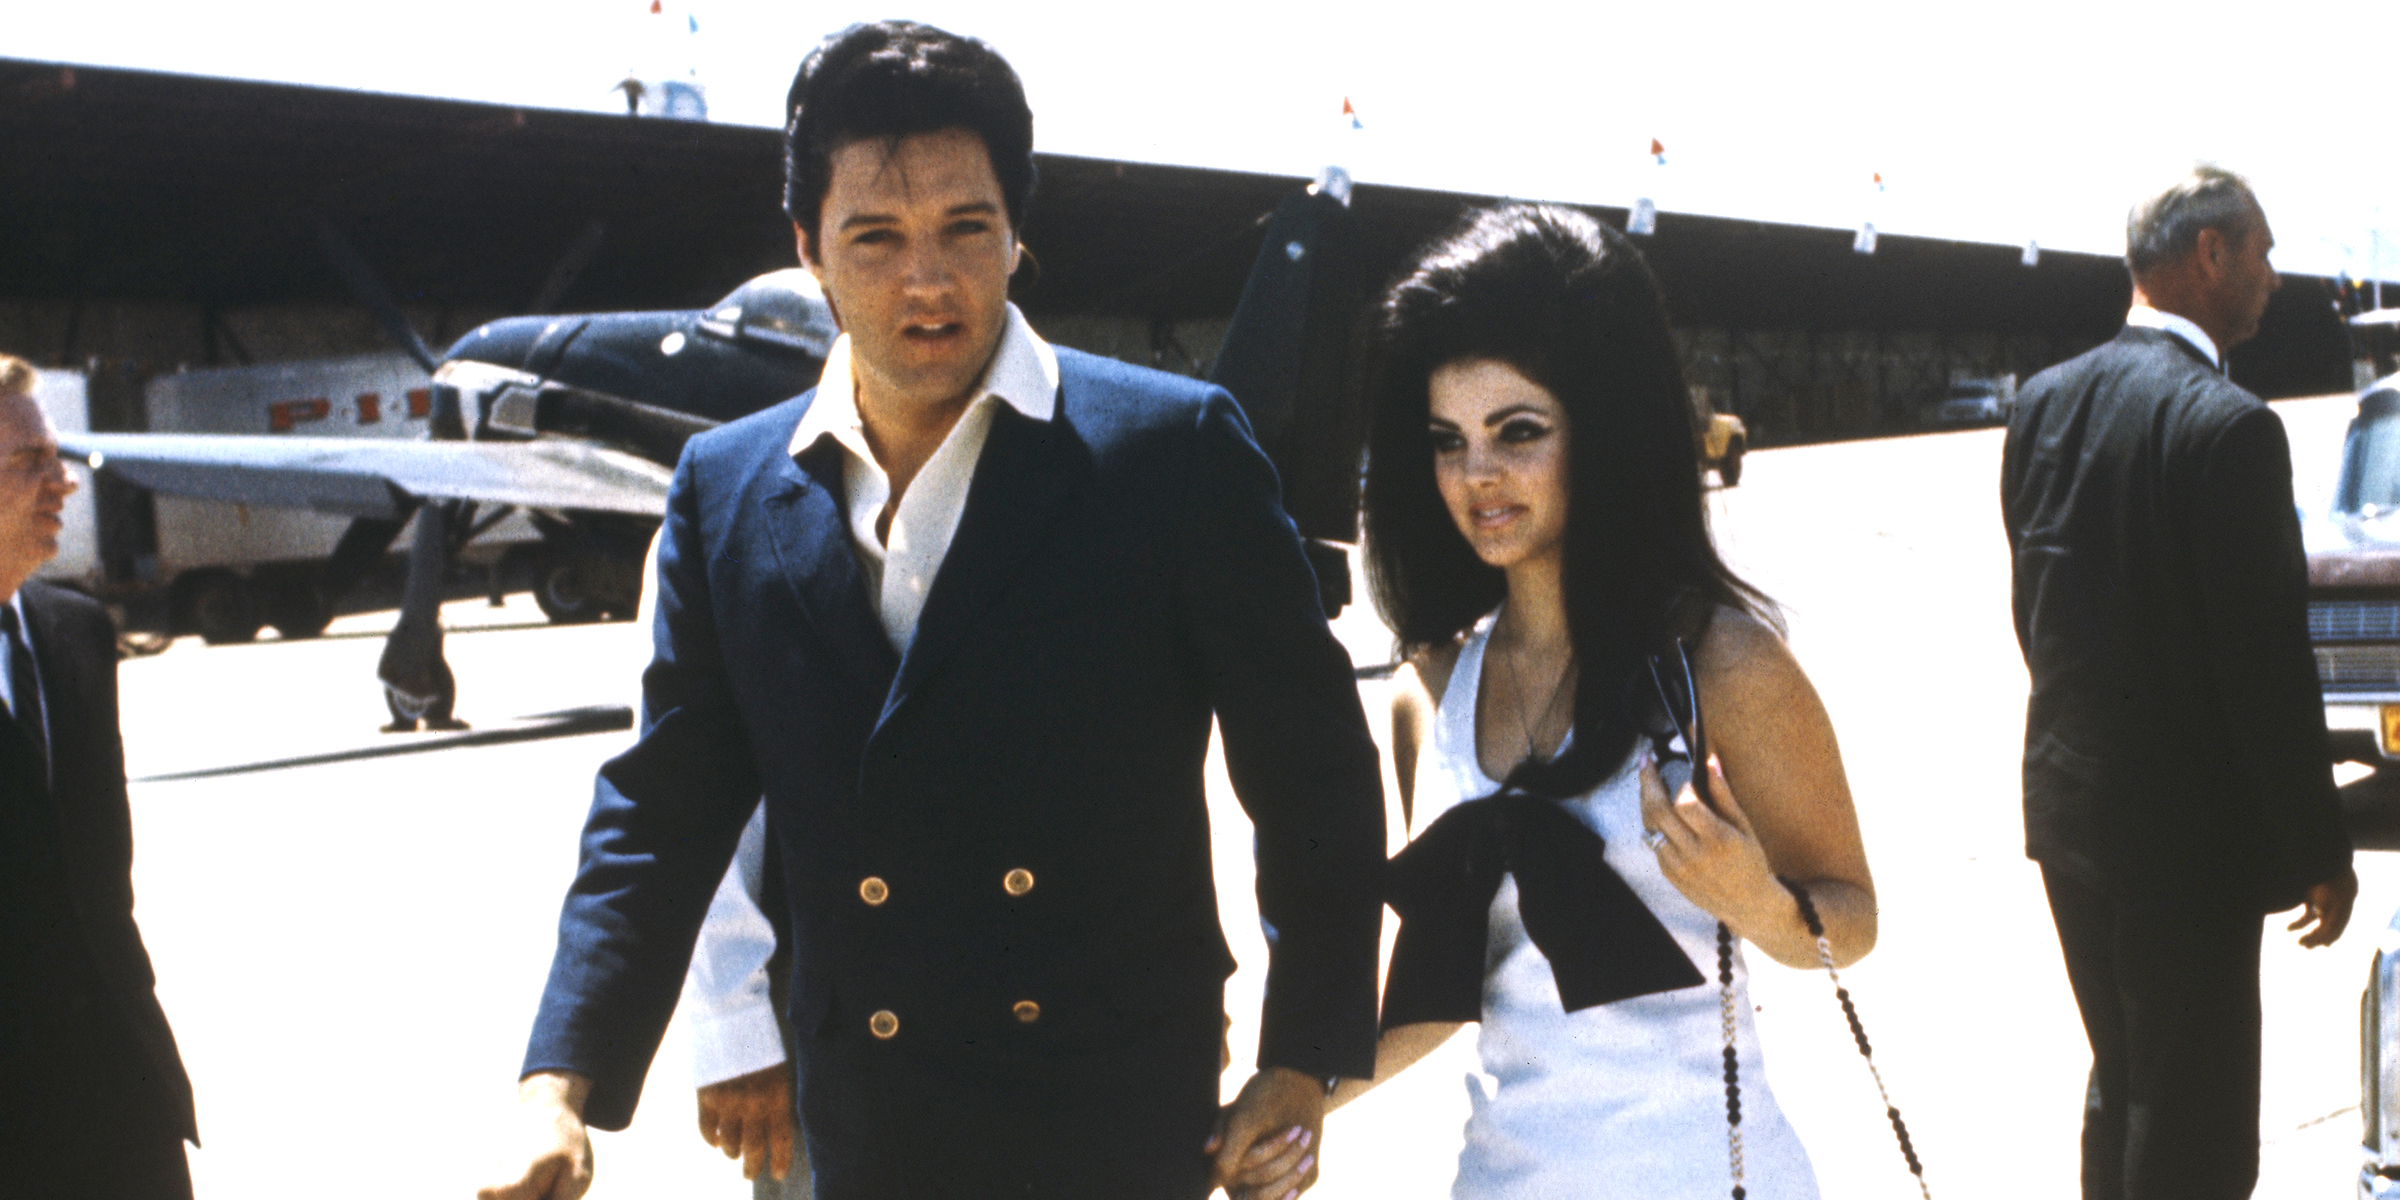 Elvis and Priscilla Presley | Source: Getty Images